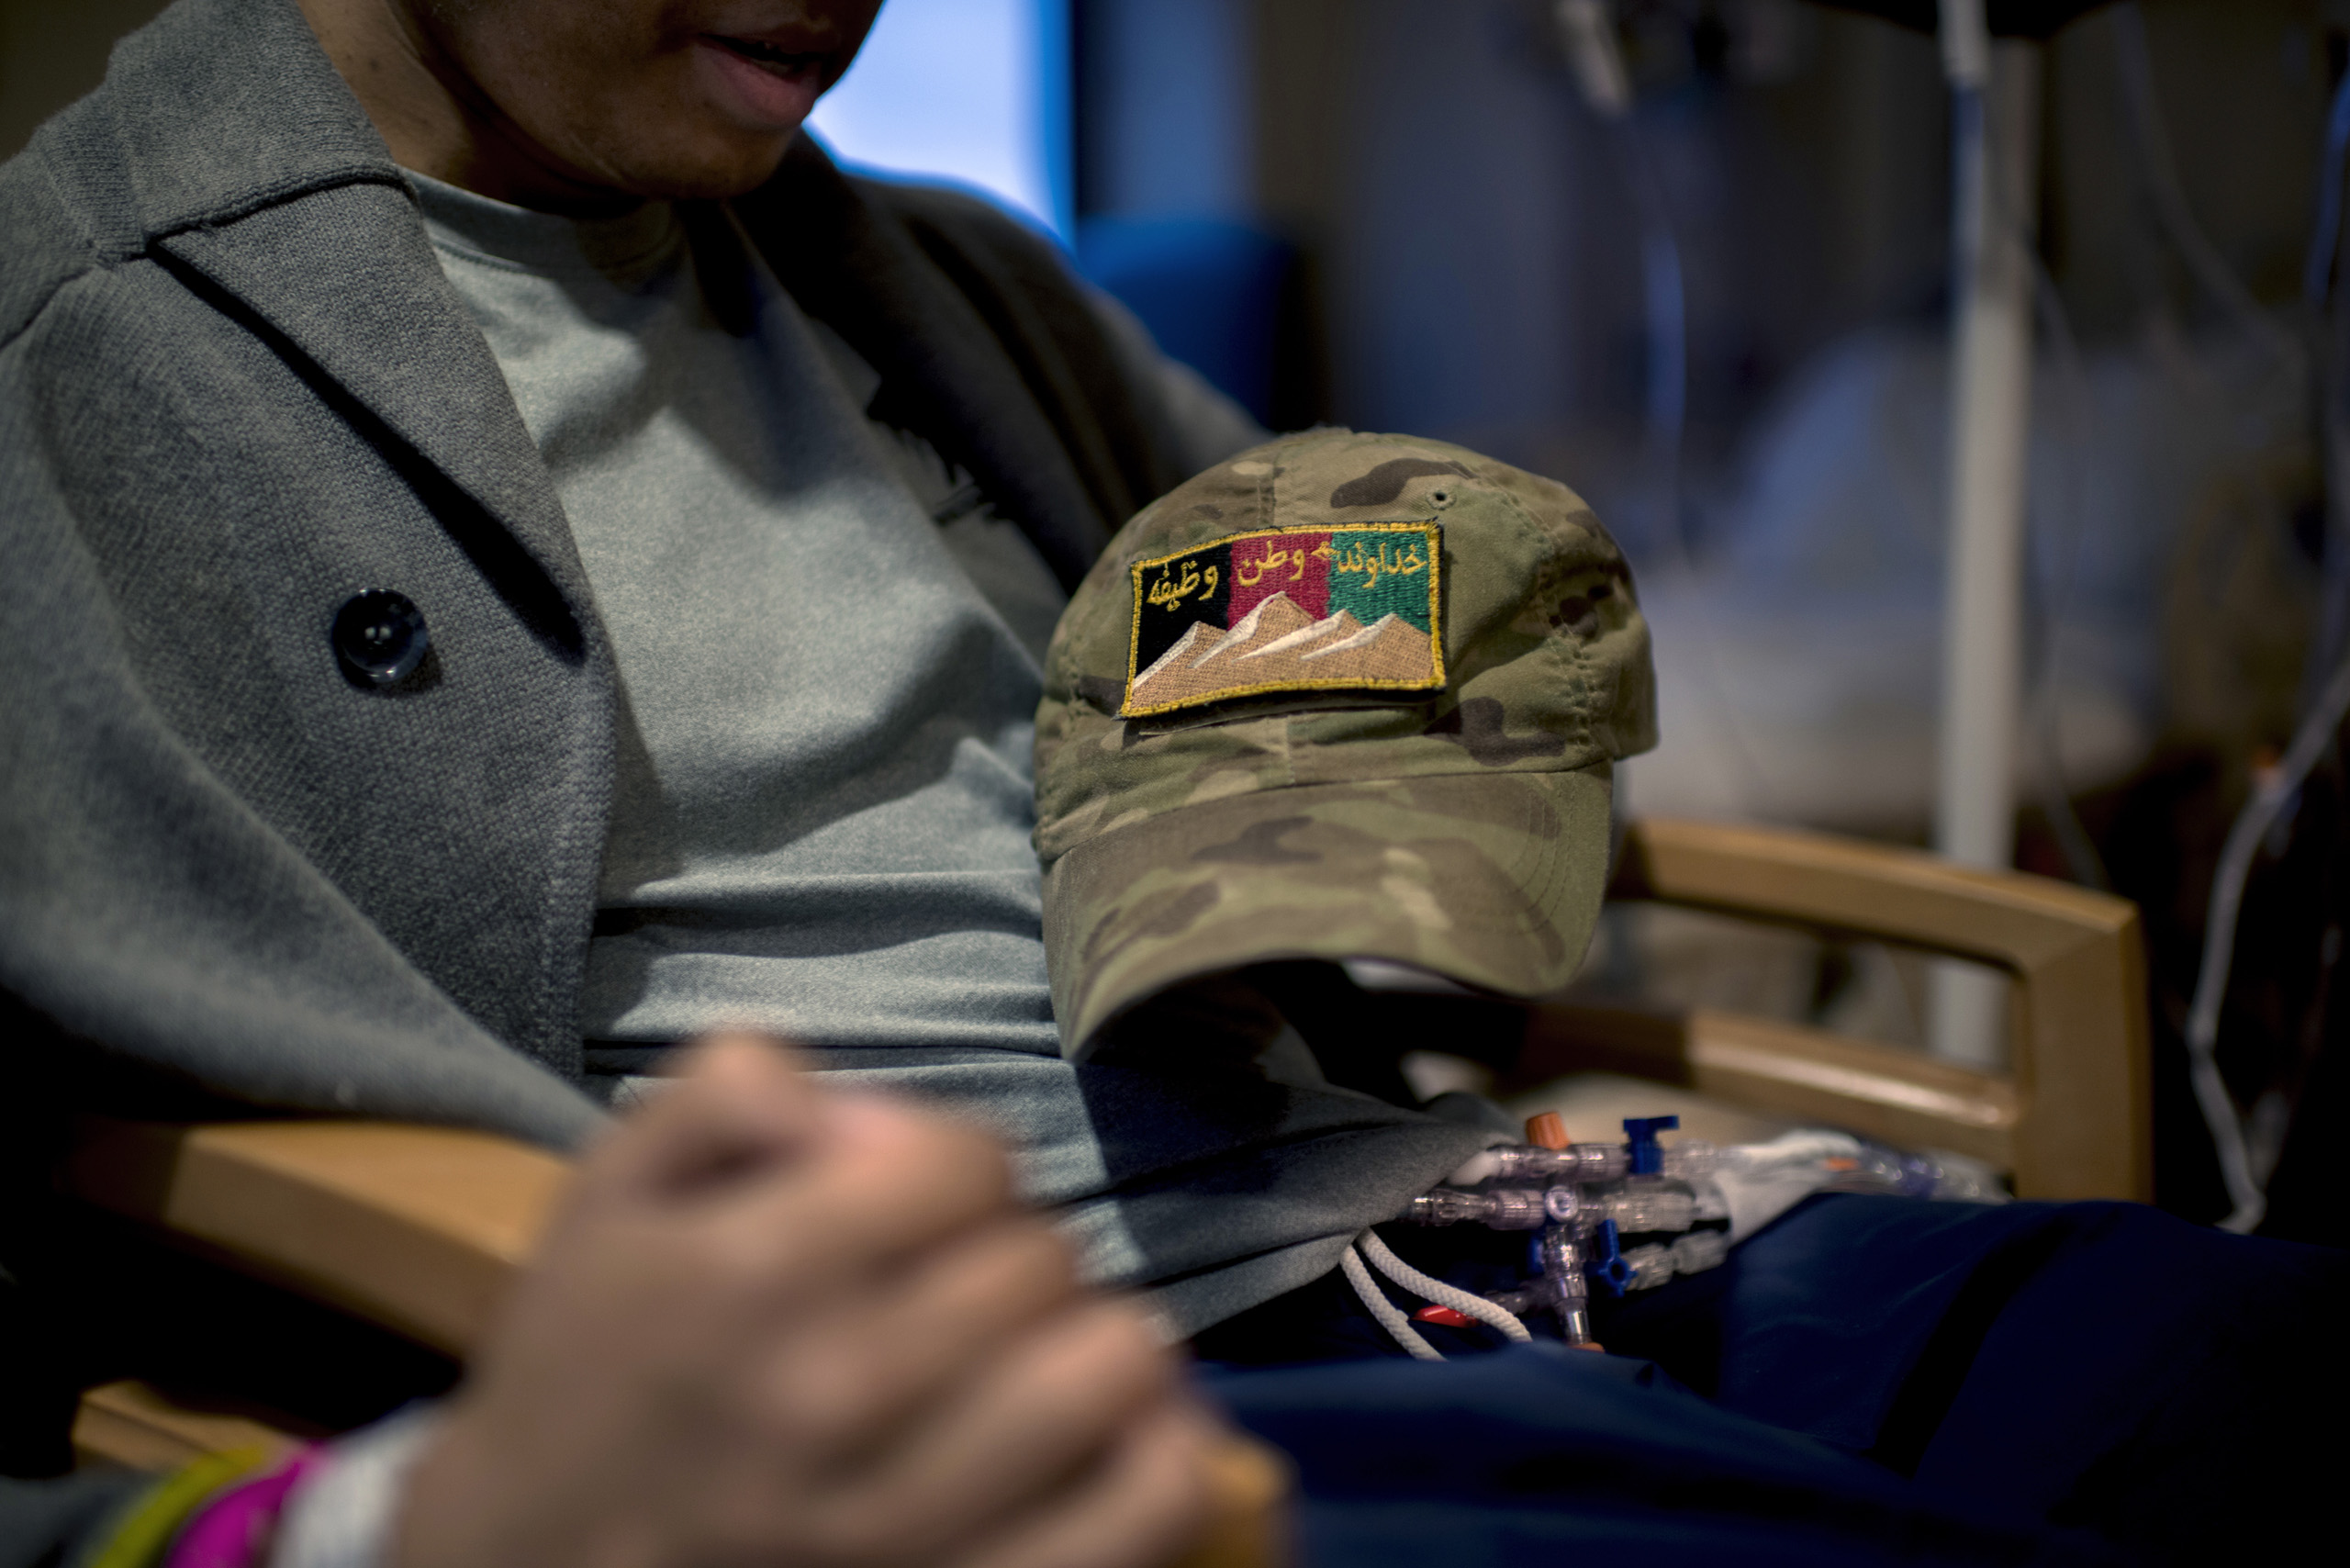 A baseball cap that Pham used to wear during his deployment that has the Afghan Army patch and  God, Duty, Country  written in Pashto on it.